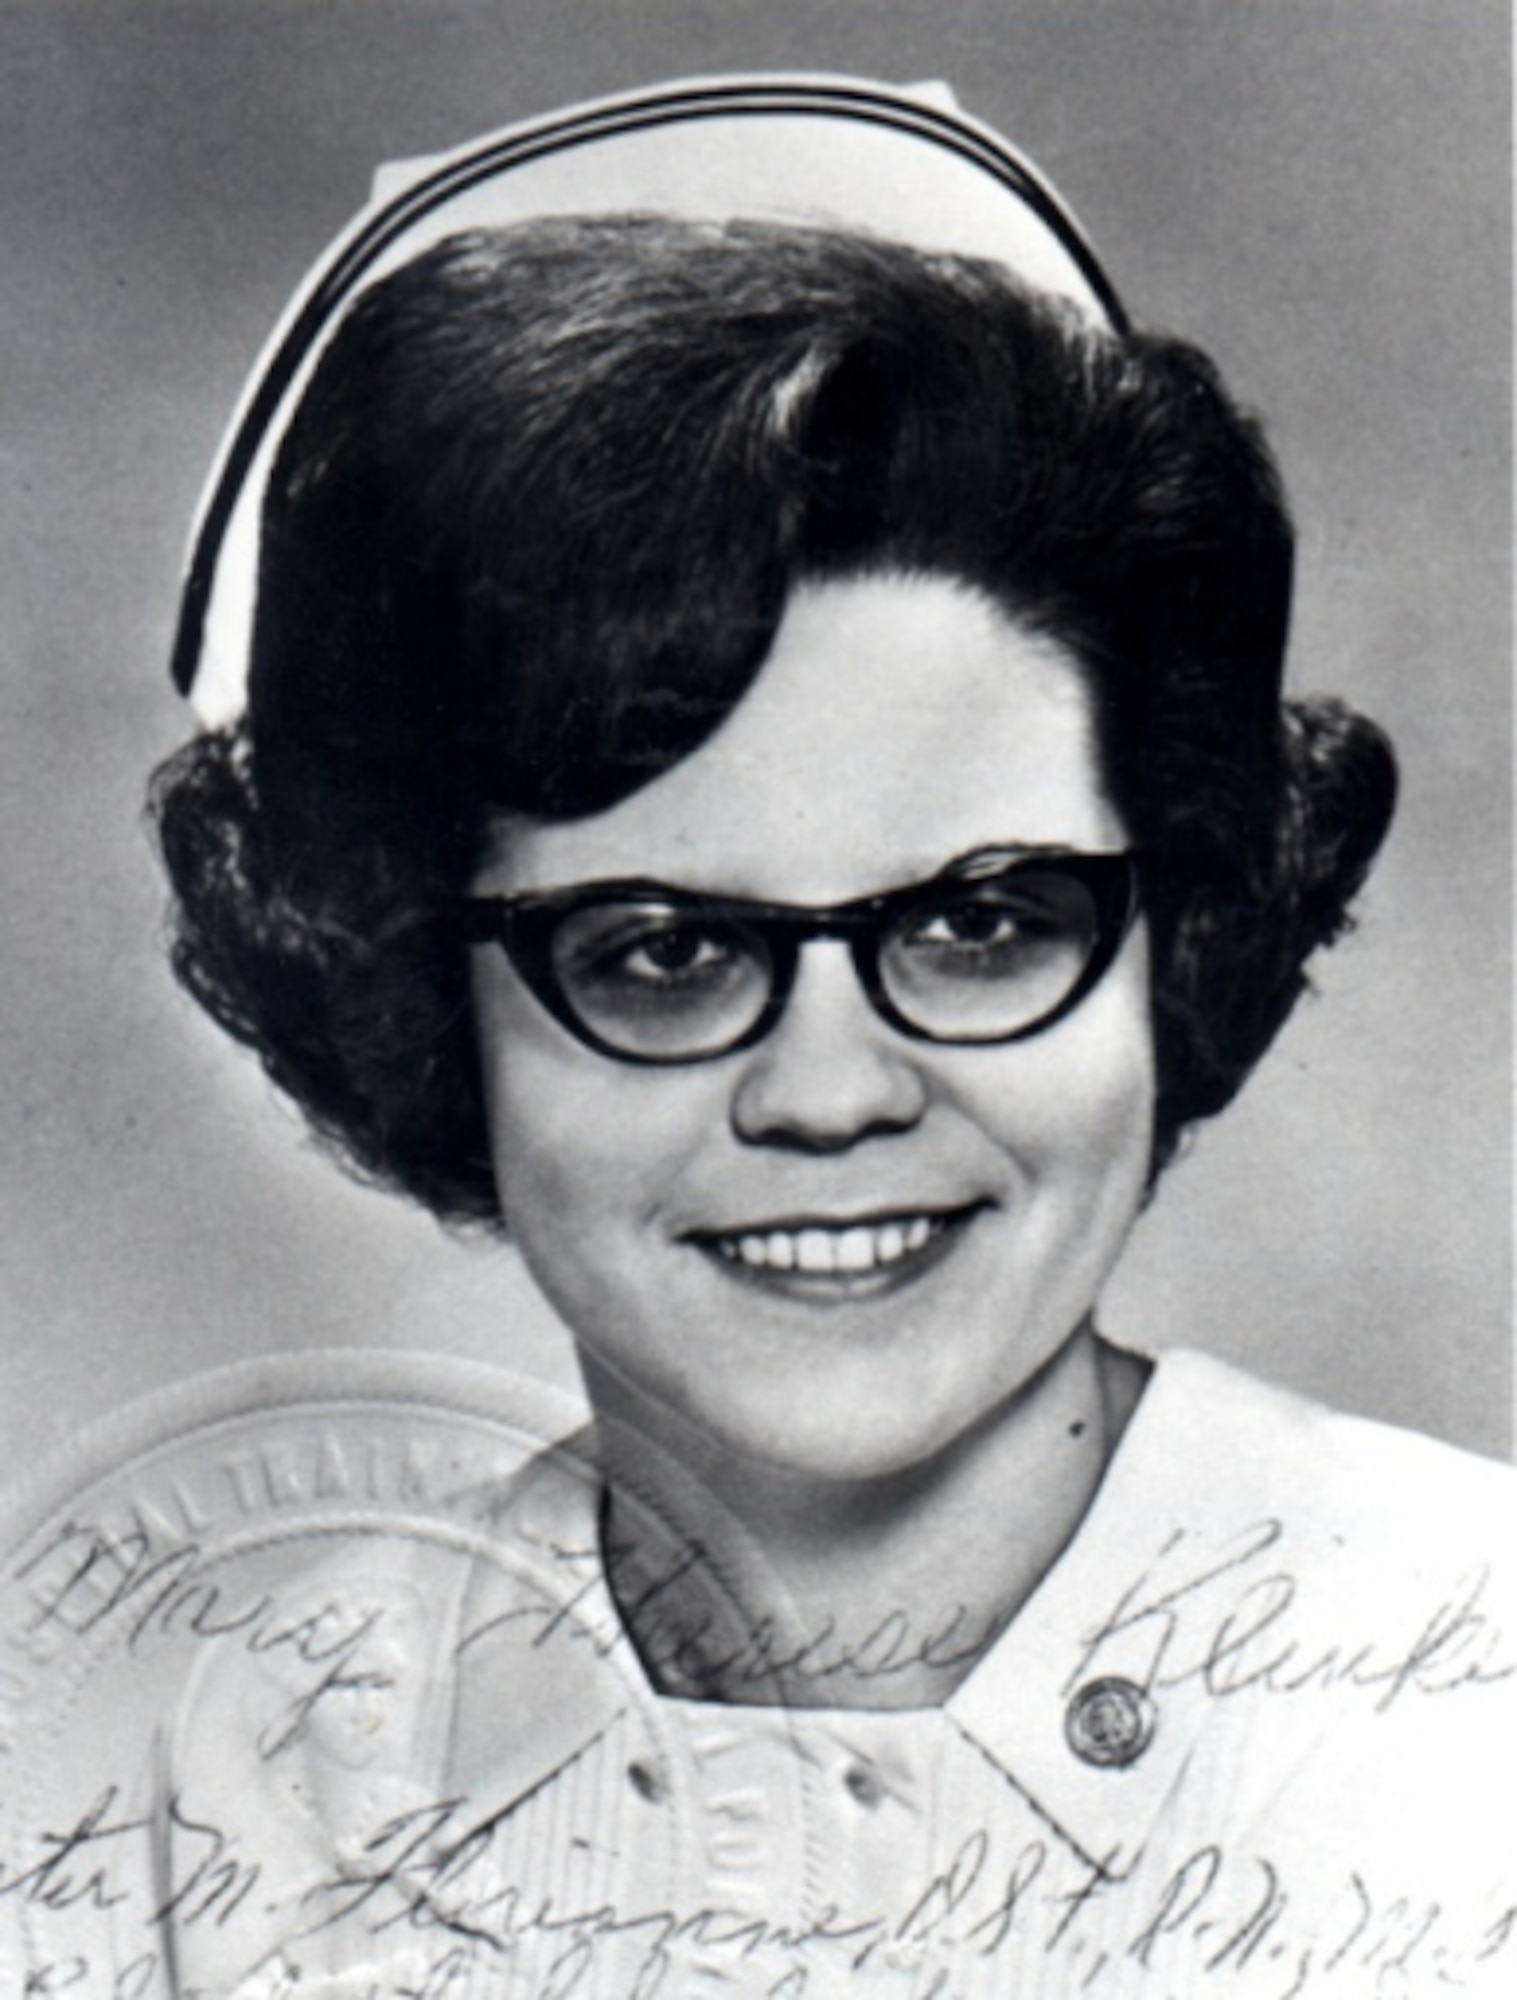 Capt. Klinker was 27-years-old when she died April 4, 1975 when the first aircraft supporting Operation Babylife crashed. Klinker was the last nurse and the only member of the Air Force Nurse Corps to be killed in Vietnam. Capt. Mary T. Klinker was posthumously awarded the Airman’s Medal for Heroism and the Meritorious Service Medal.